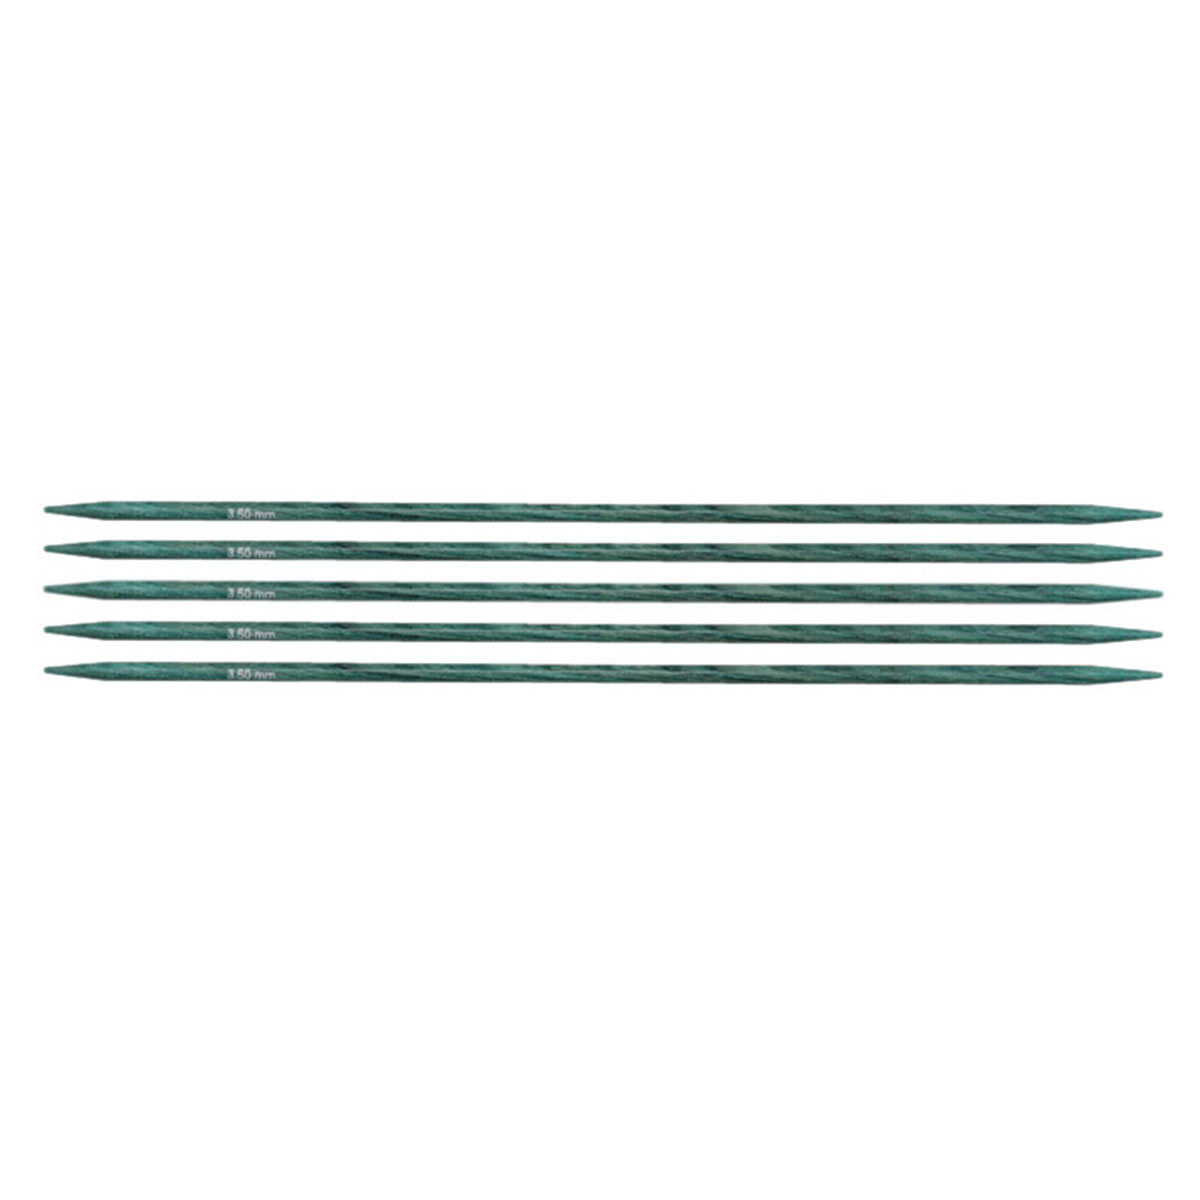 Knitter's Pride Dreamz Double Point Needles - US 0 - 6 (2.0mm) Aquamarine  Needles at Jimmy Beans Wool